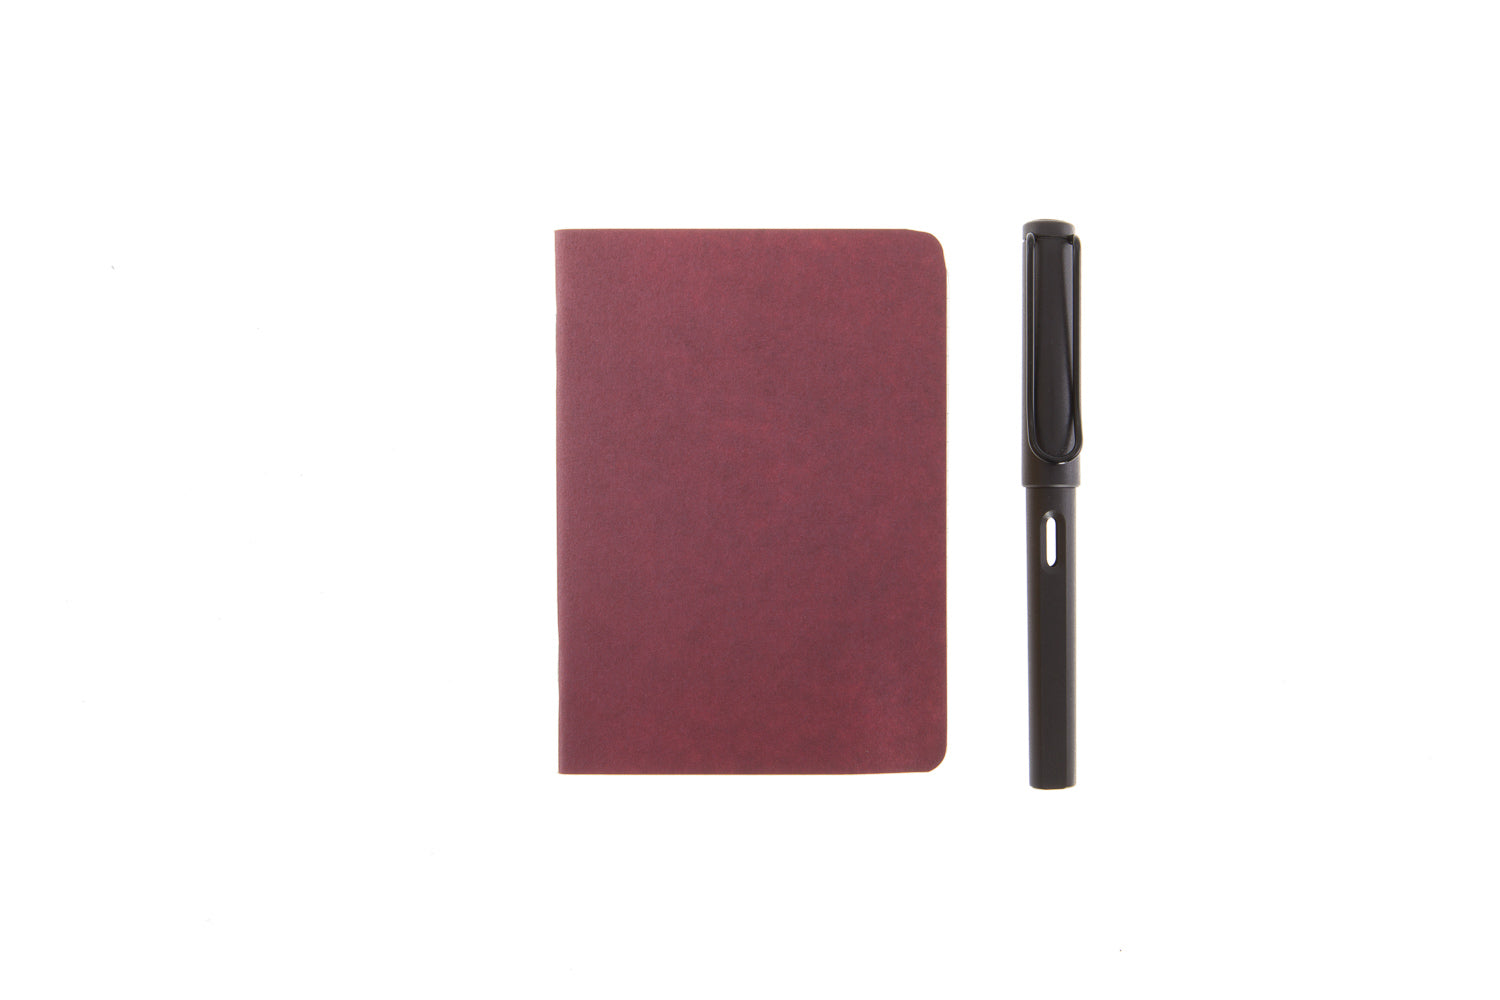 Fountain pen friendly notebooks that aren't Rhodia or Tomoe River